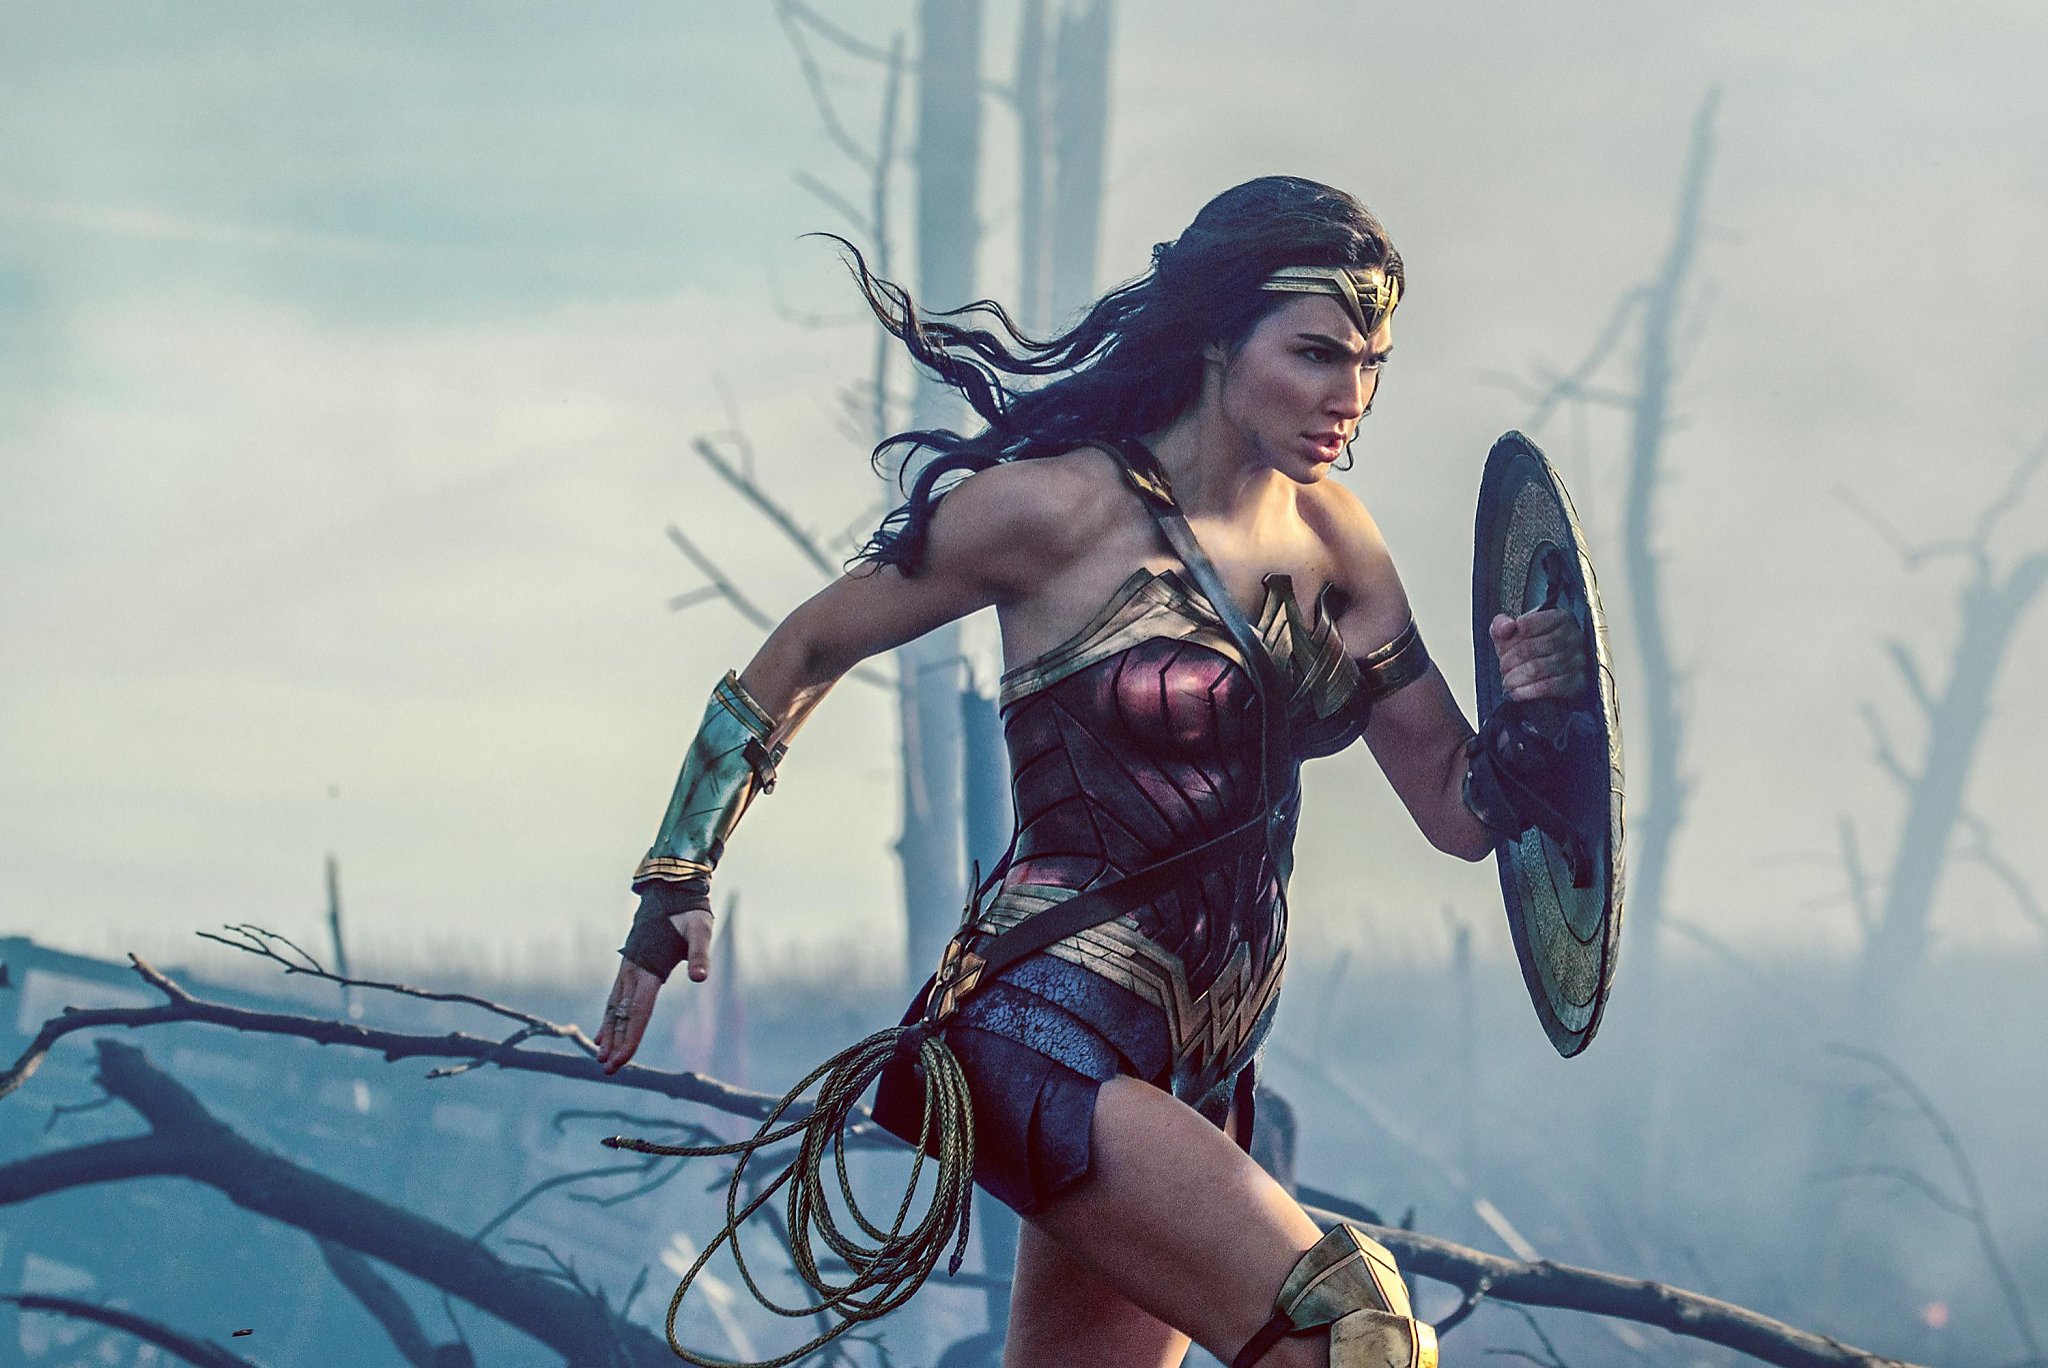 Wonder Woman' gives different perspective to an action movie